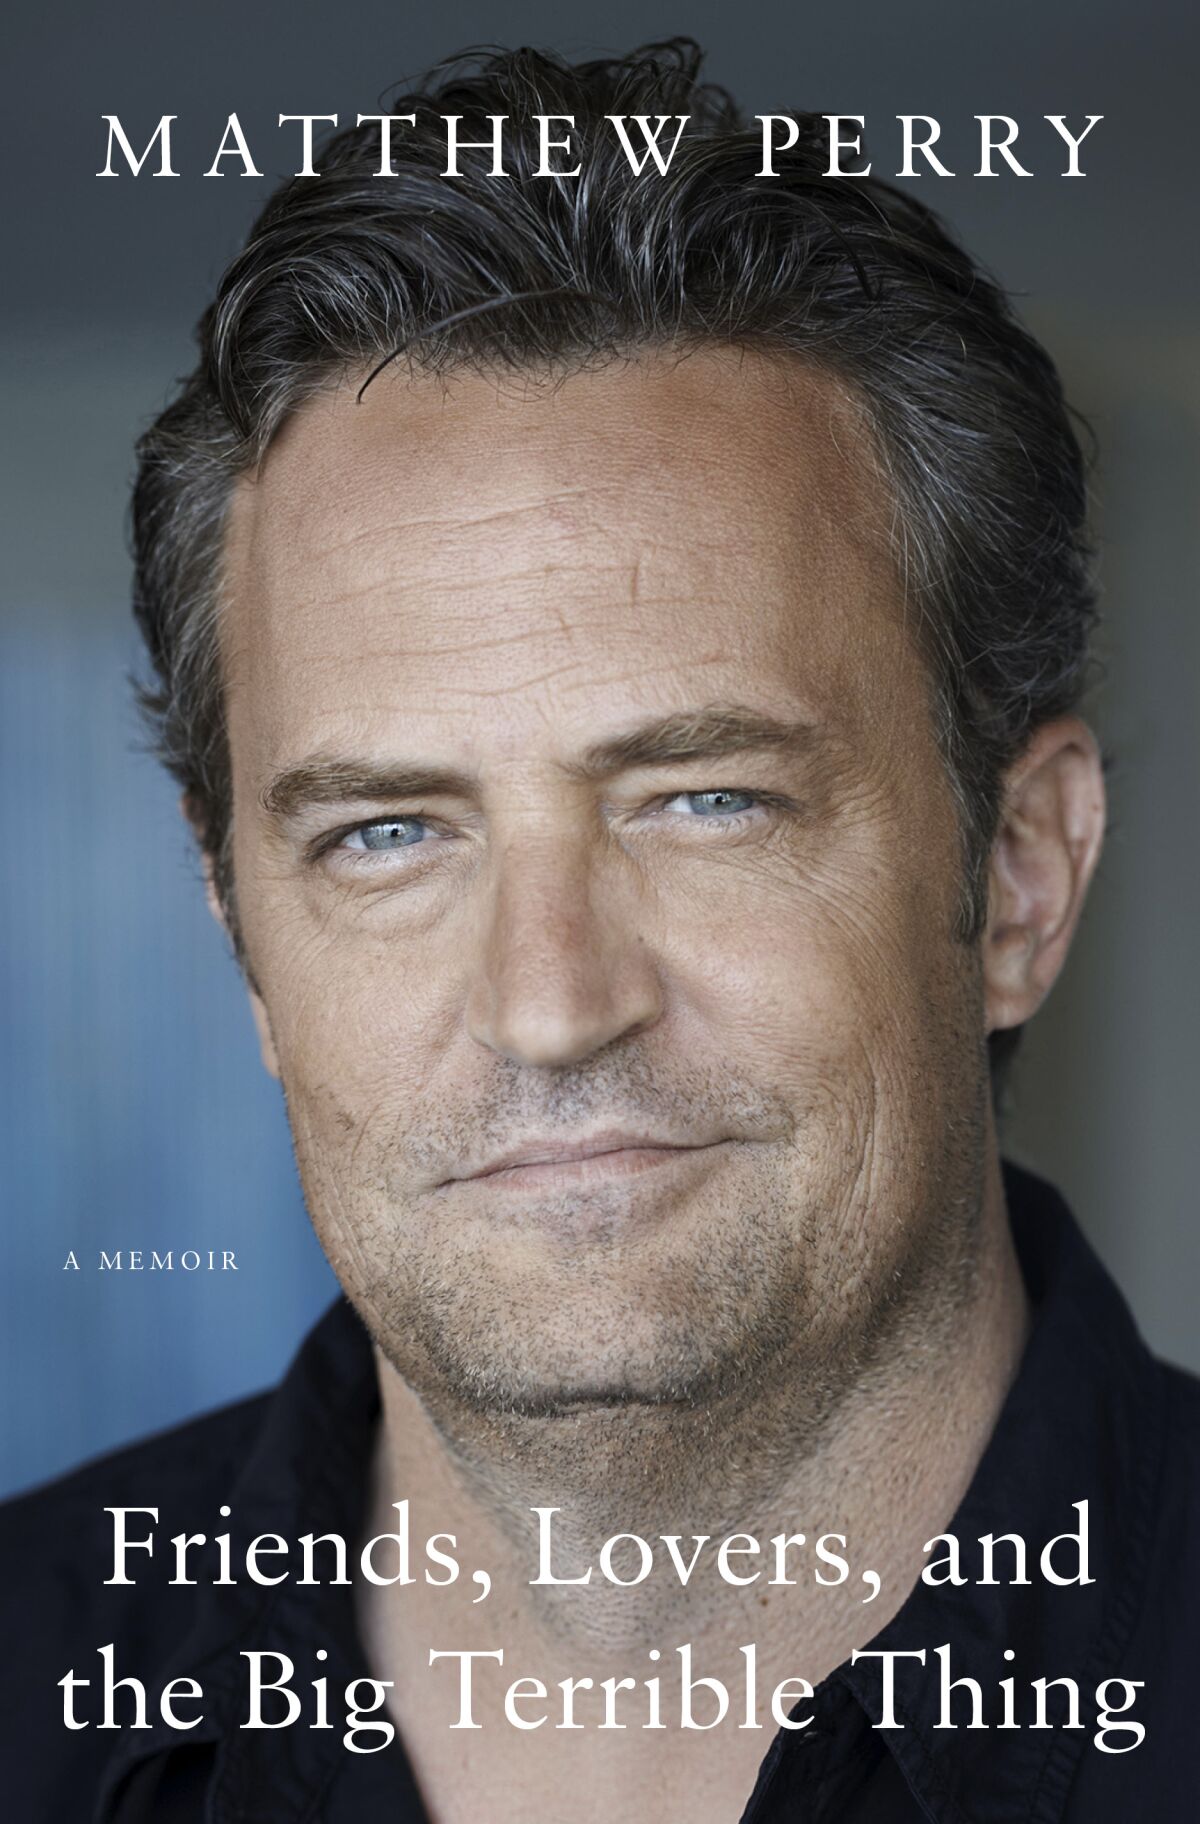 "Friends, Lovers, and the Big Terrible Thing," by Matthew Perry